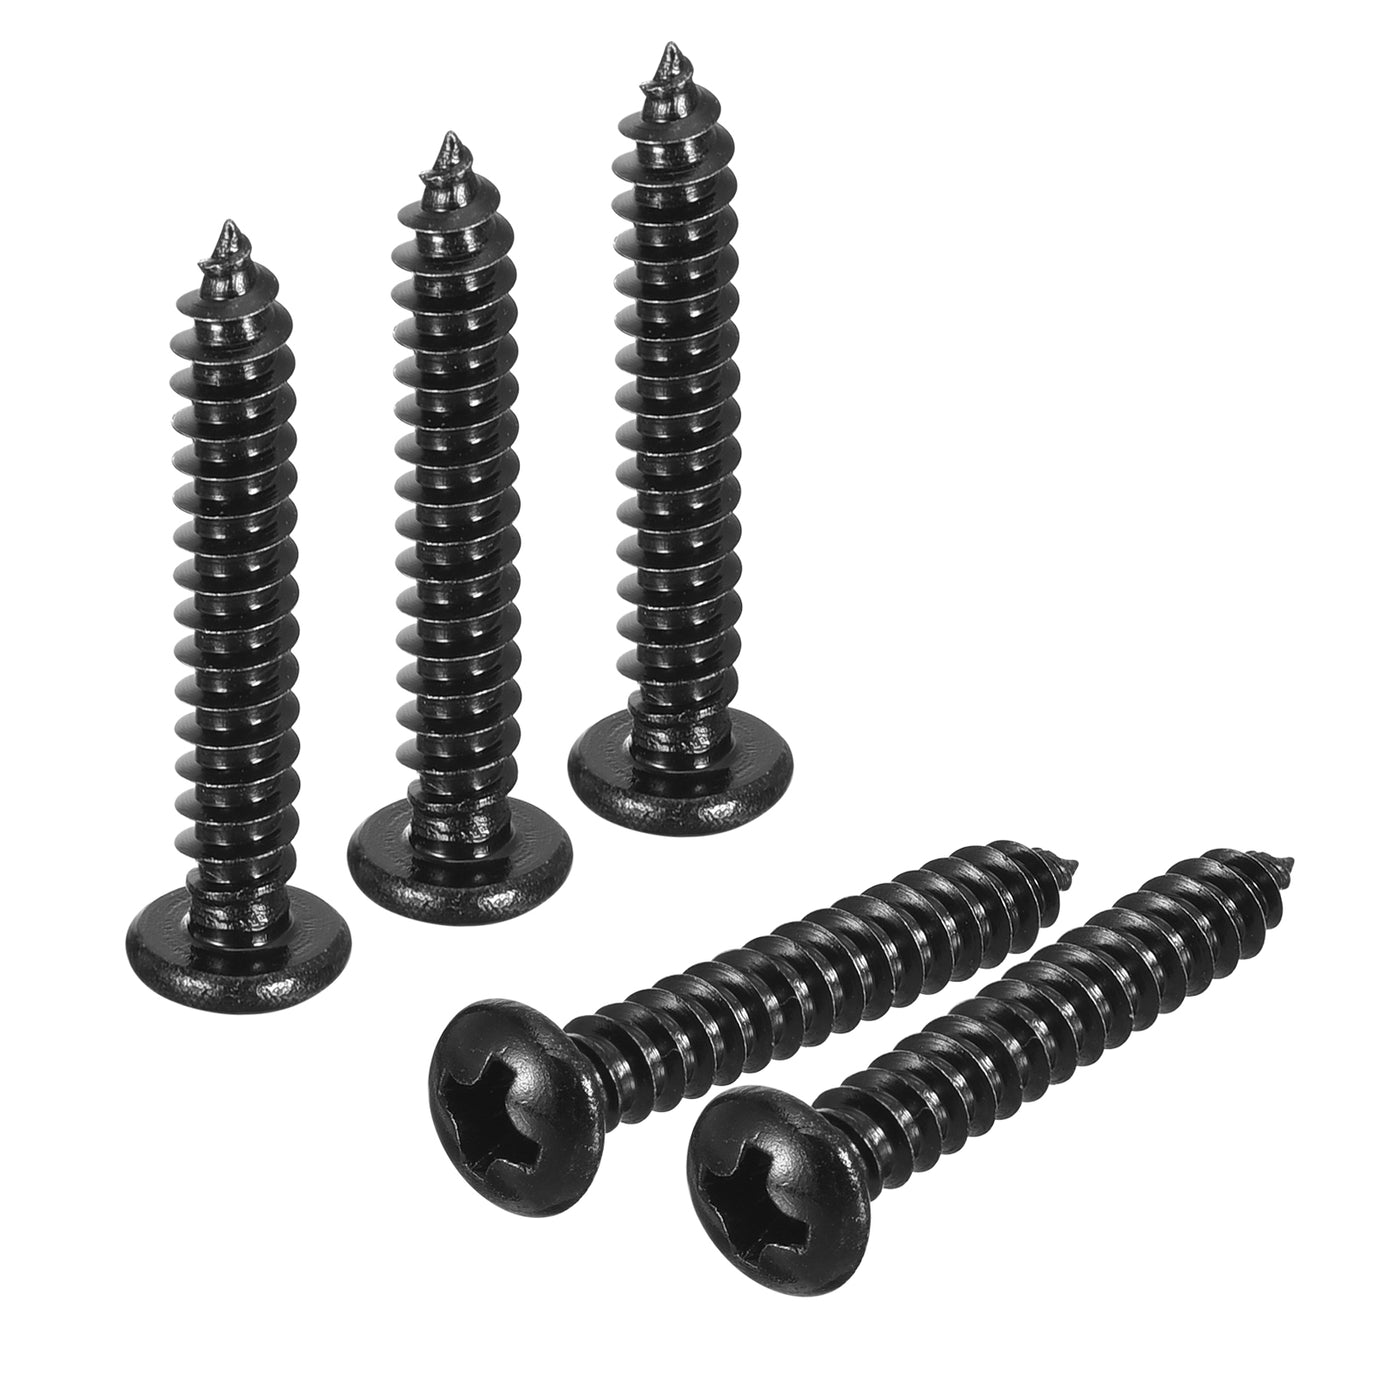 uxcell Uxcell #8 x 1" Phillips Pan Head Self-tapping Screw, 50pcs - 304 Stainless Steel Round Head Wood Screw Full Thread (Black)